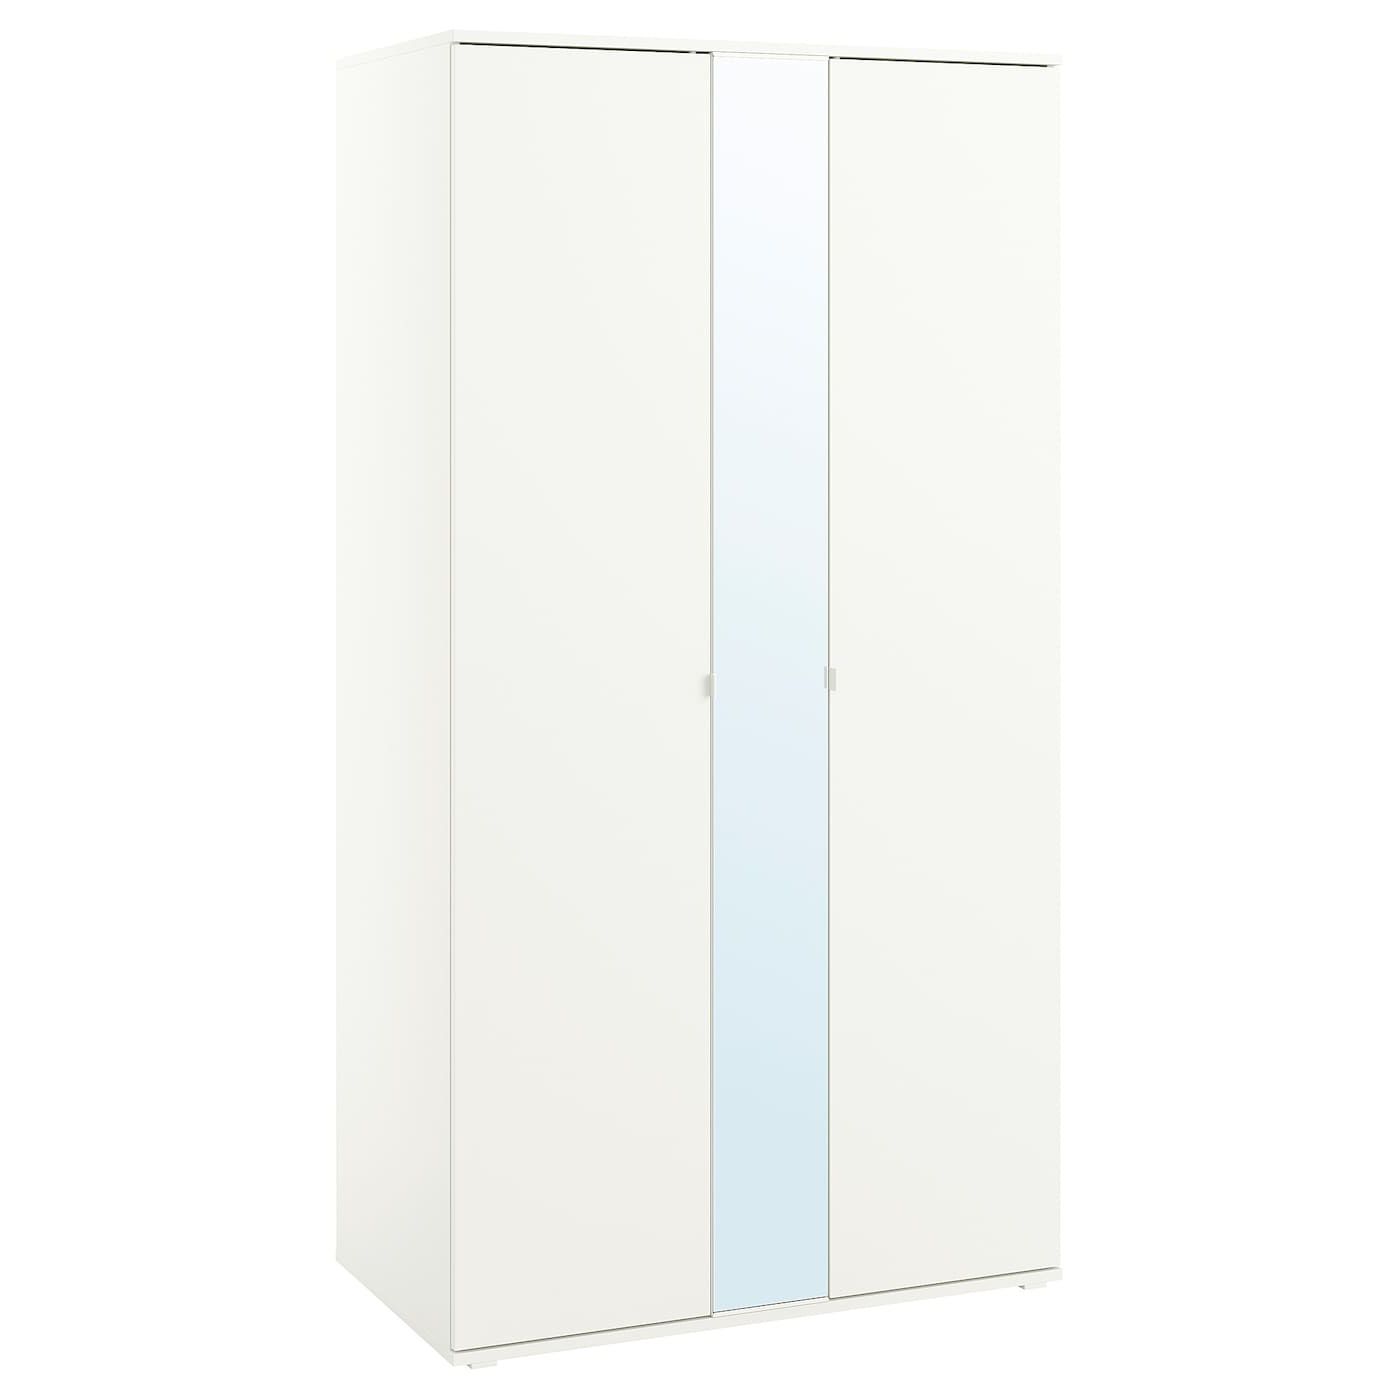 Vihals Wardrobe With 2 Doors, White, 413/8x221/2x783/4" – Ikea Within Two Door White Wardrobes (Gallery 7 of 20)